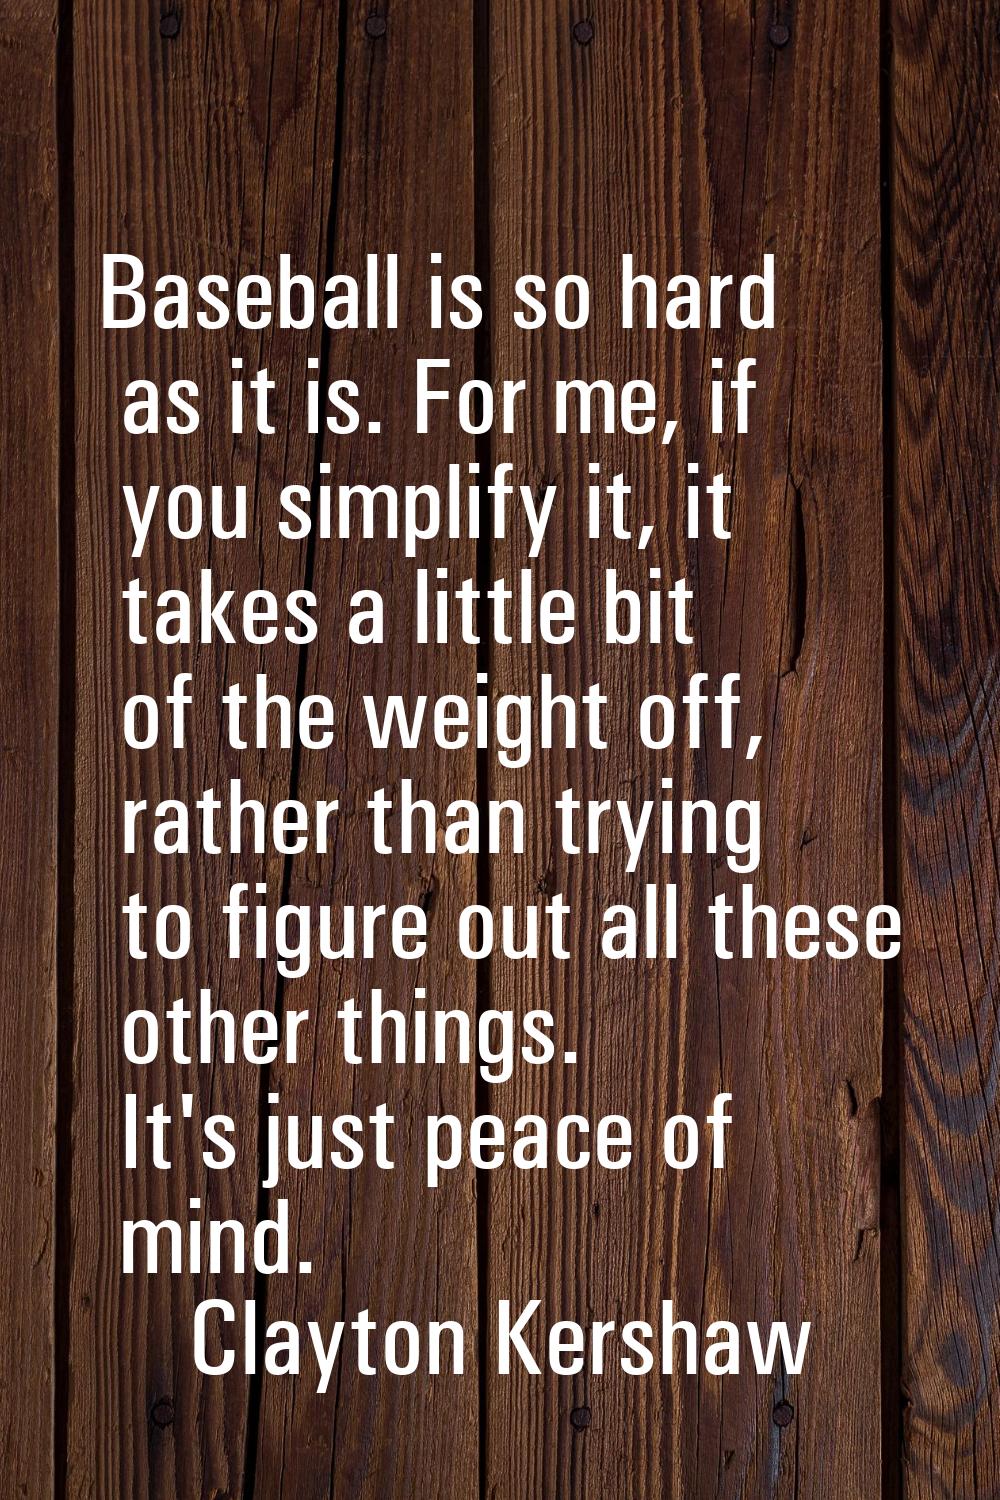 Baseball is so hard as it is. For me, if you simplify it, it takes a little bit of the weight off, 